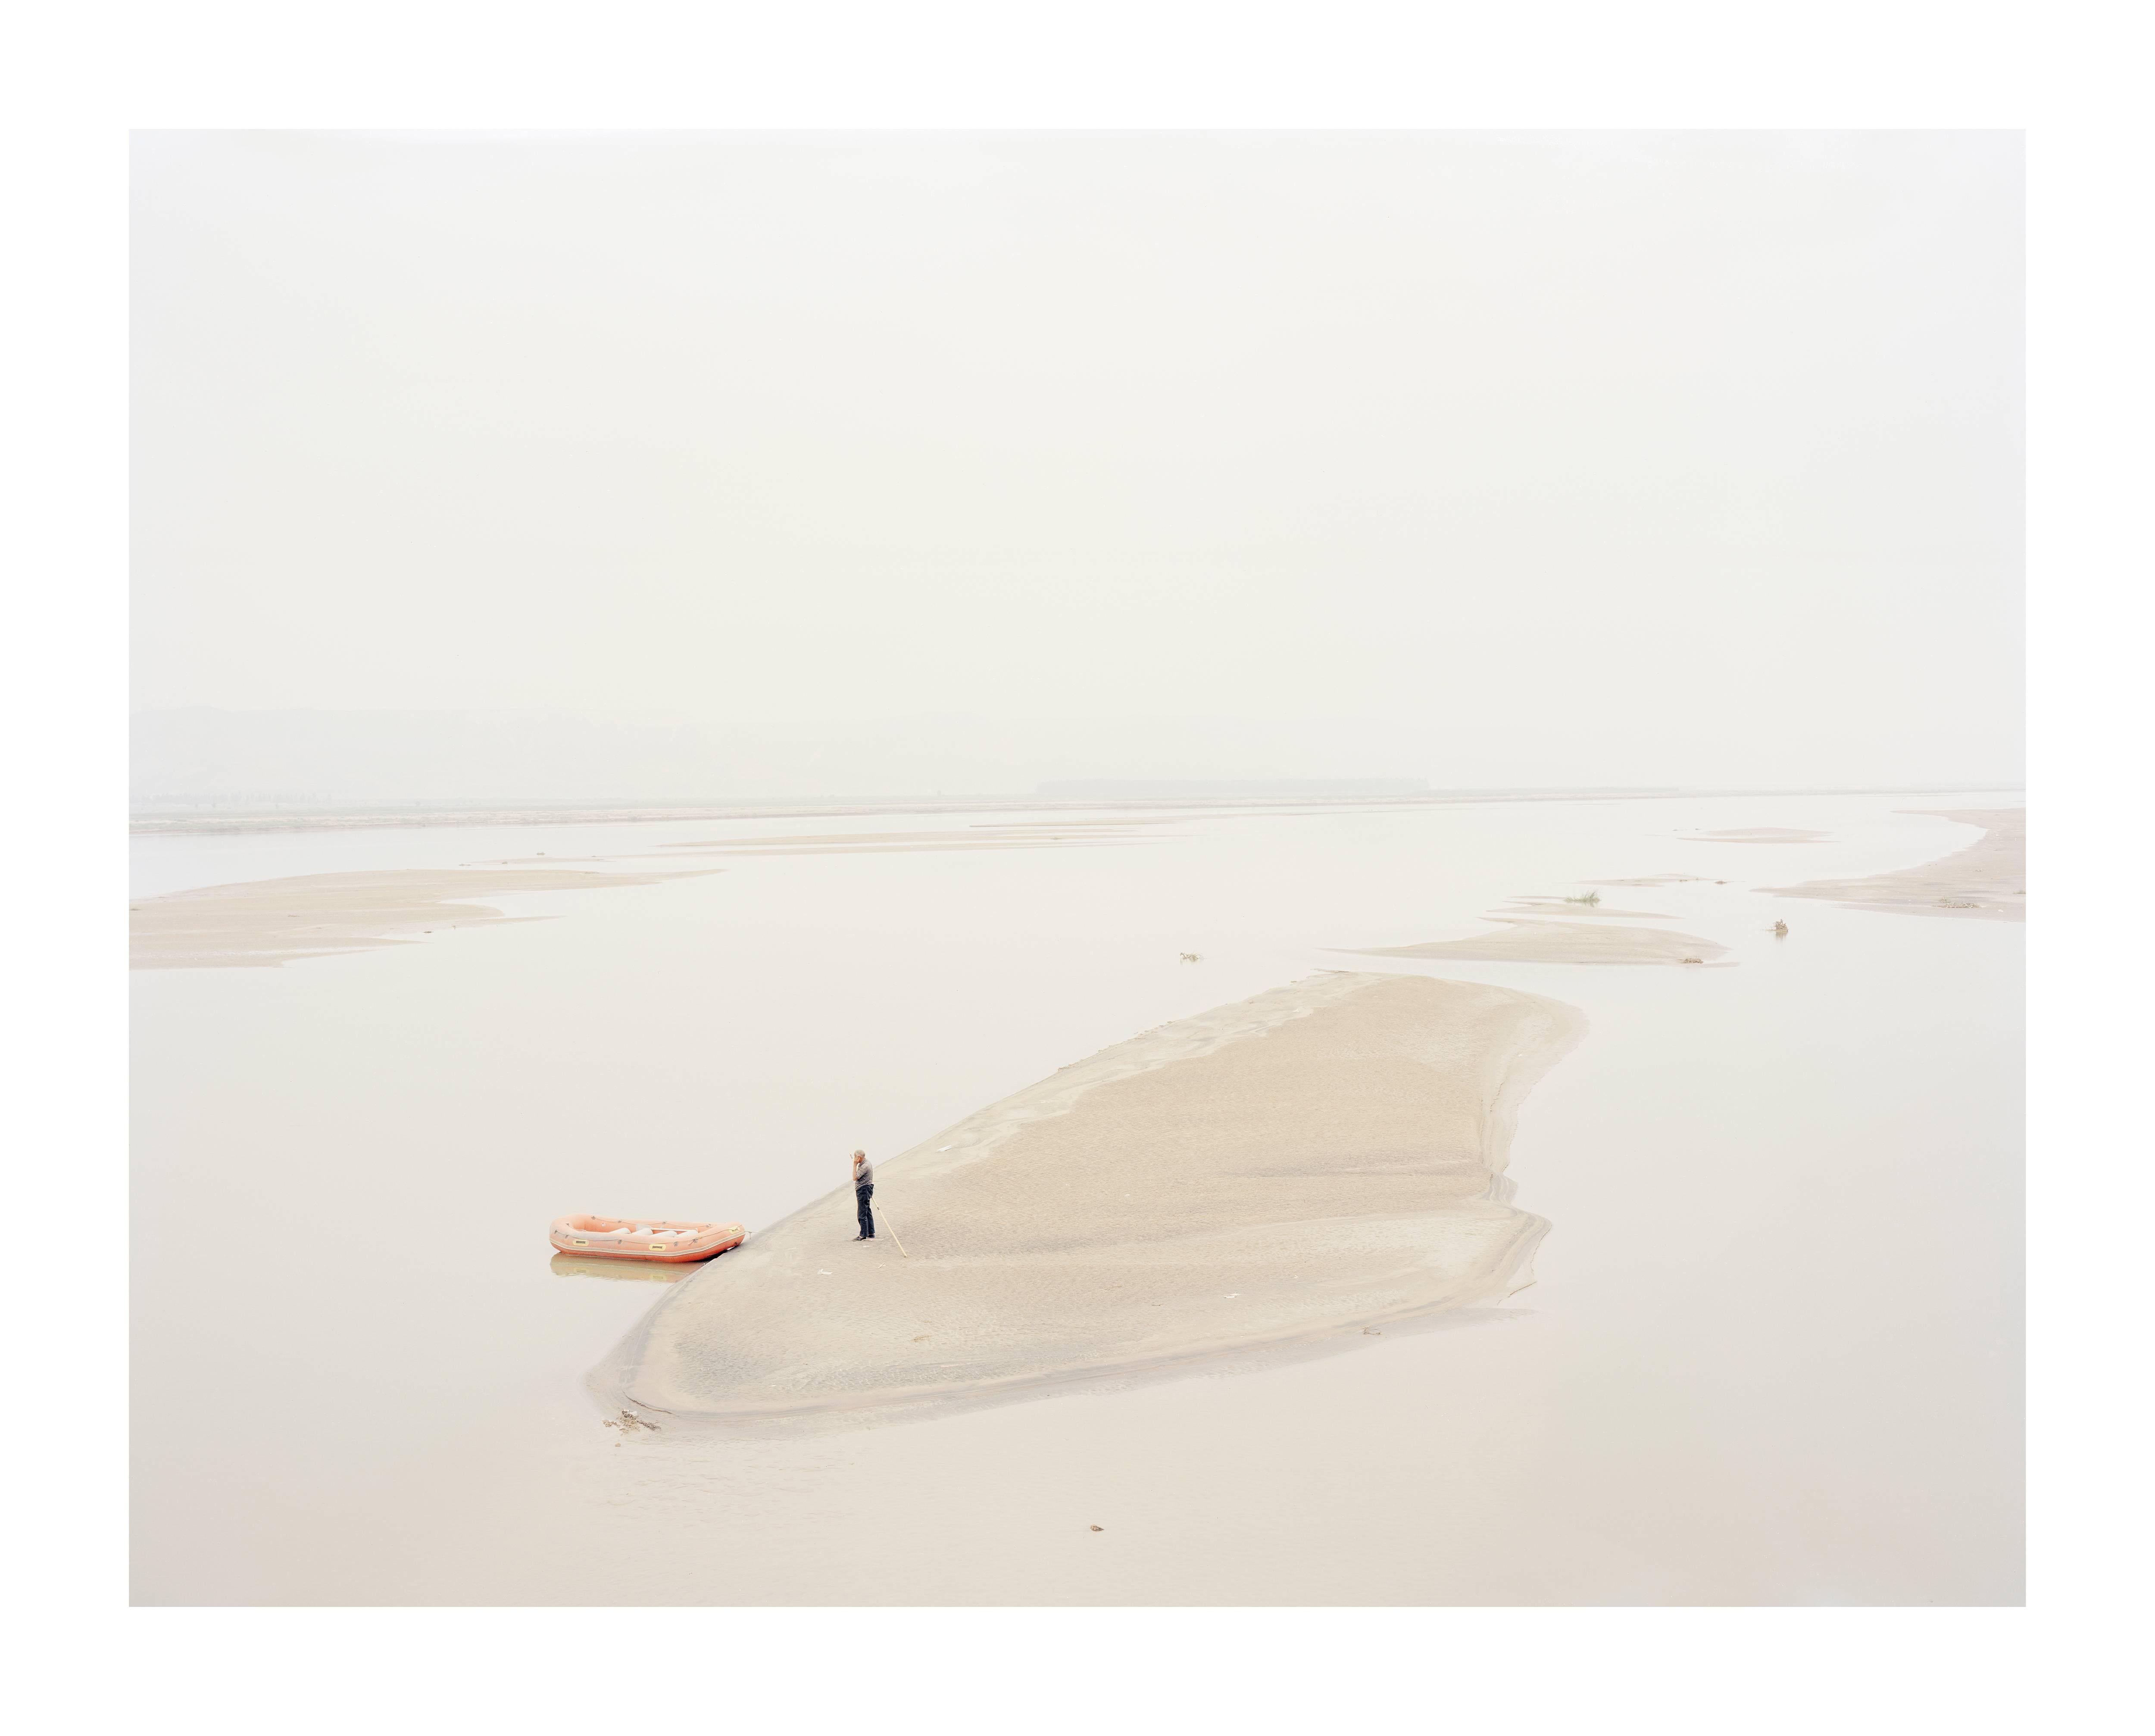 Zhang Kechun Color Photograph - A Man Standing on an Island in the Middle of the River Shaanxi, China - Kechun